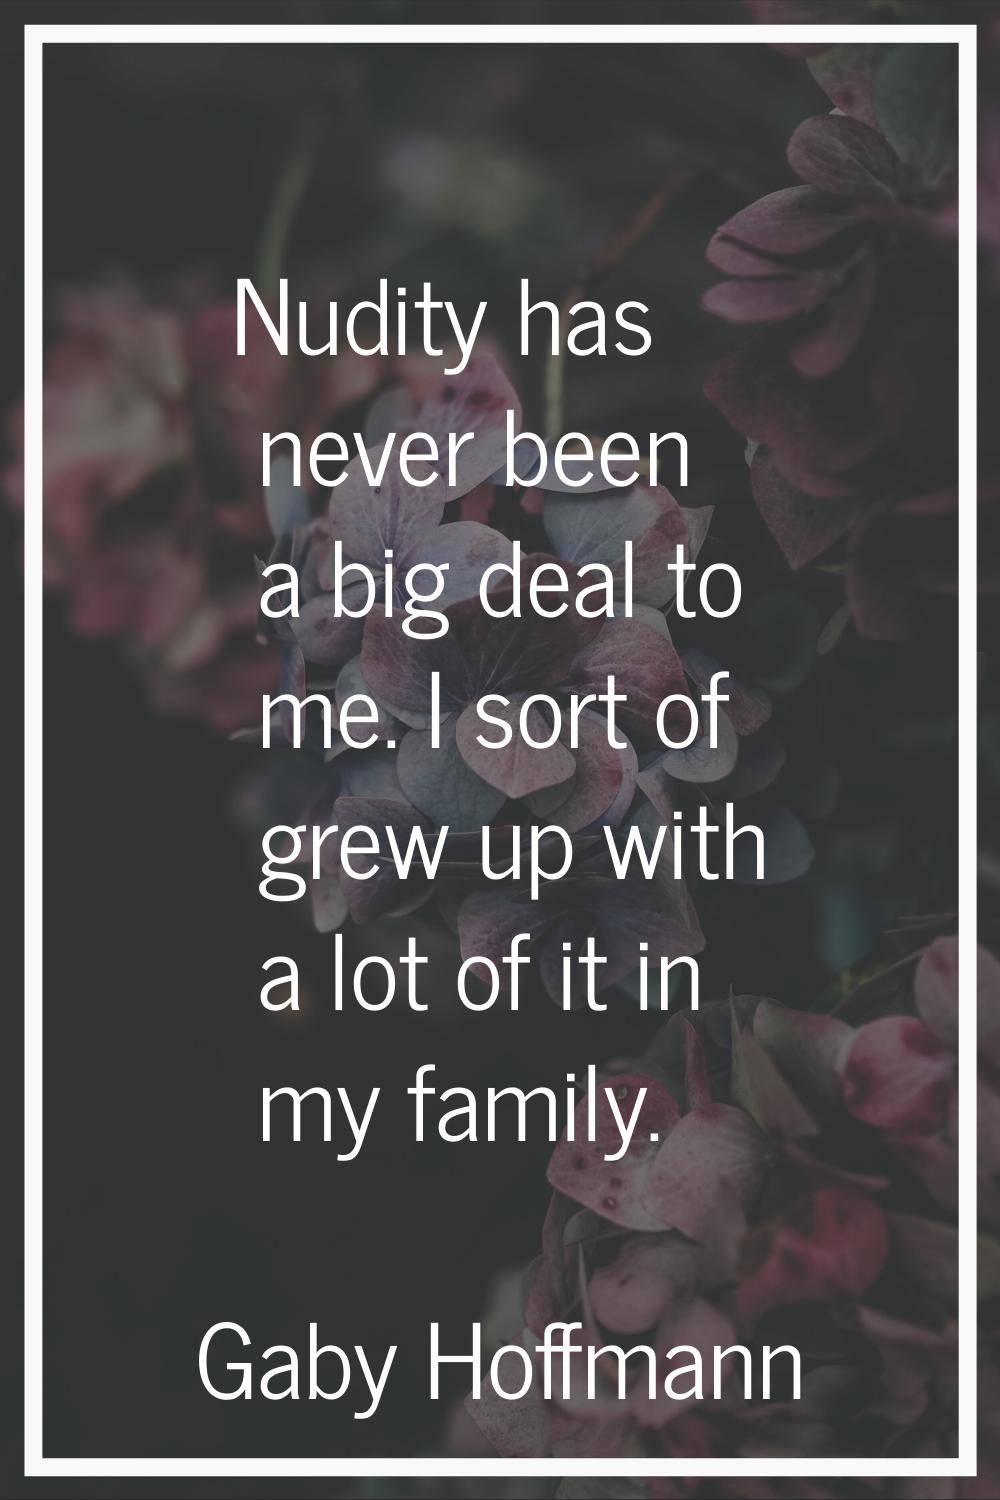 Nudity has never been a big deal to me. I sort of grew up with a lot of it in my family.